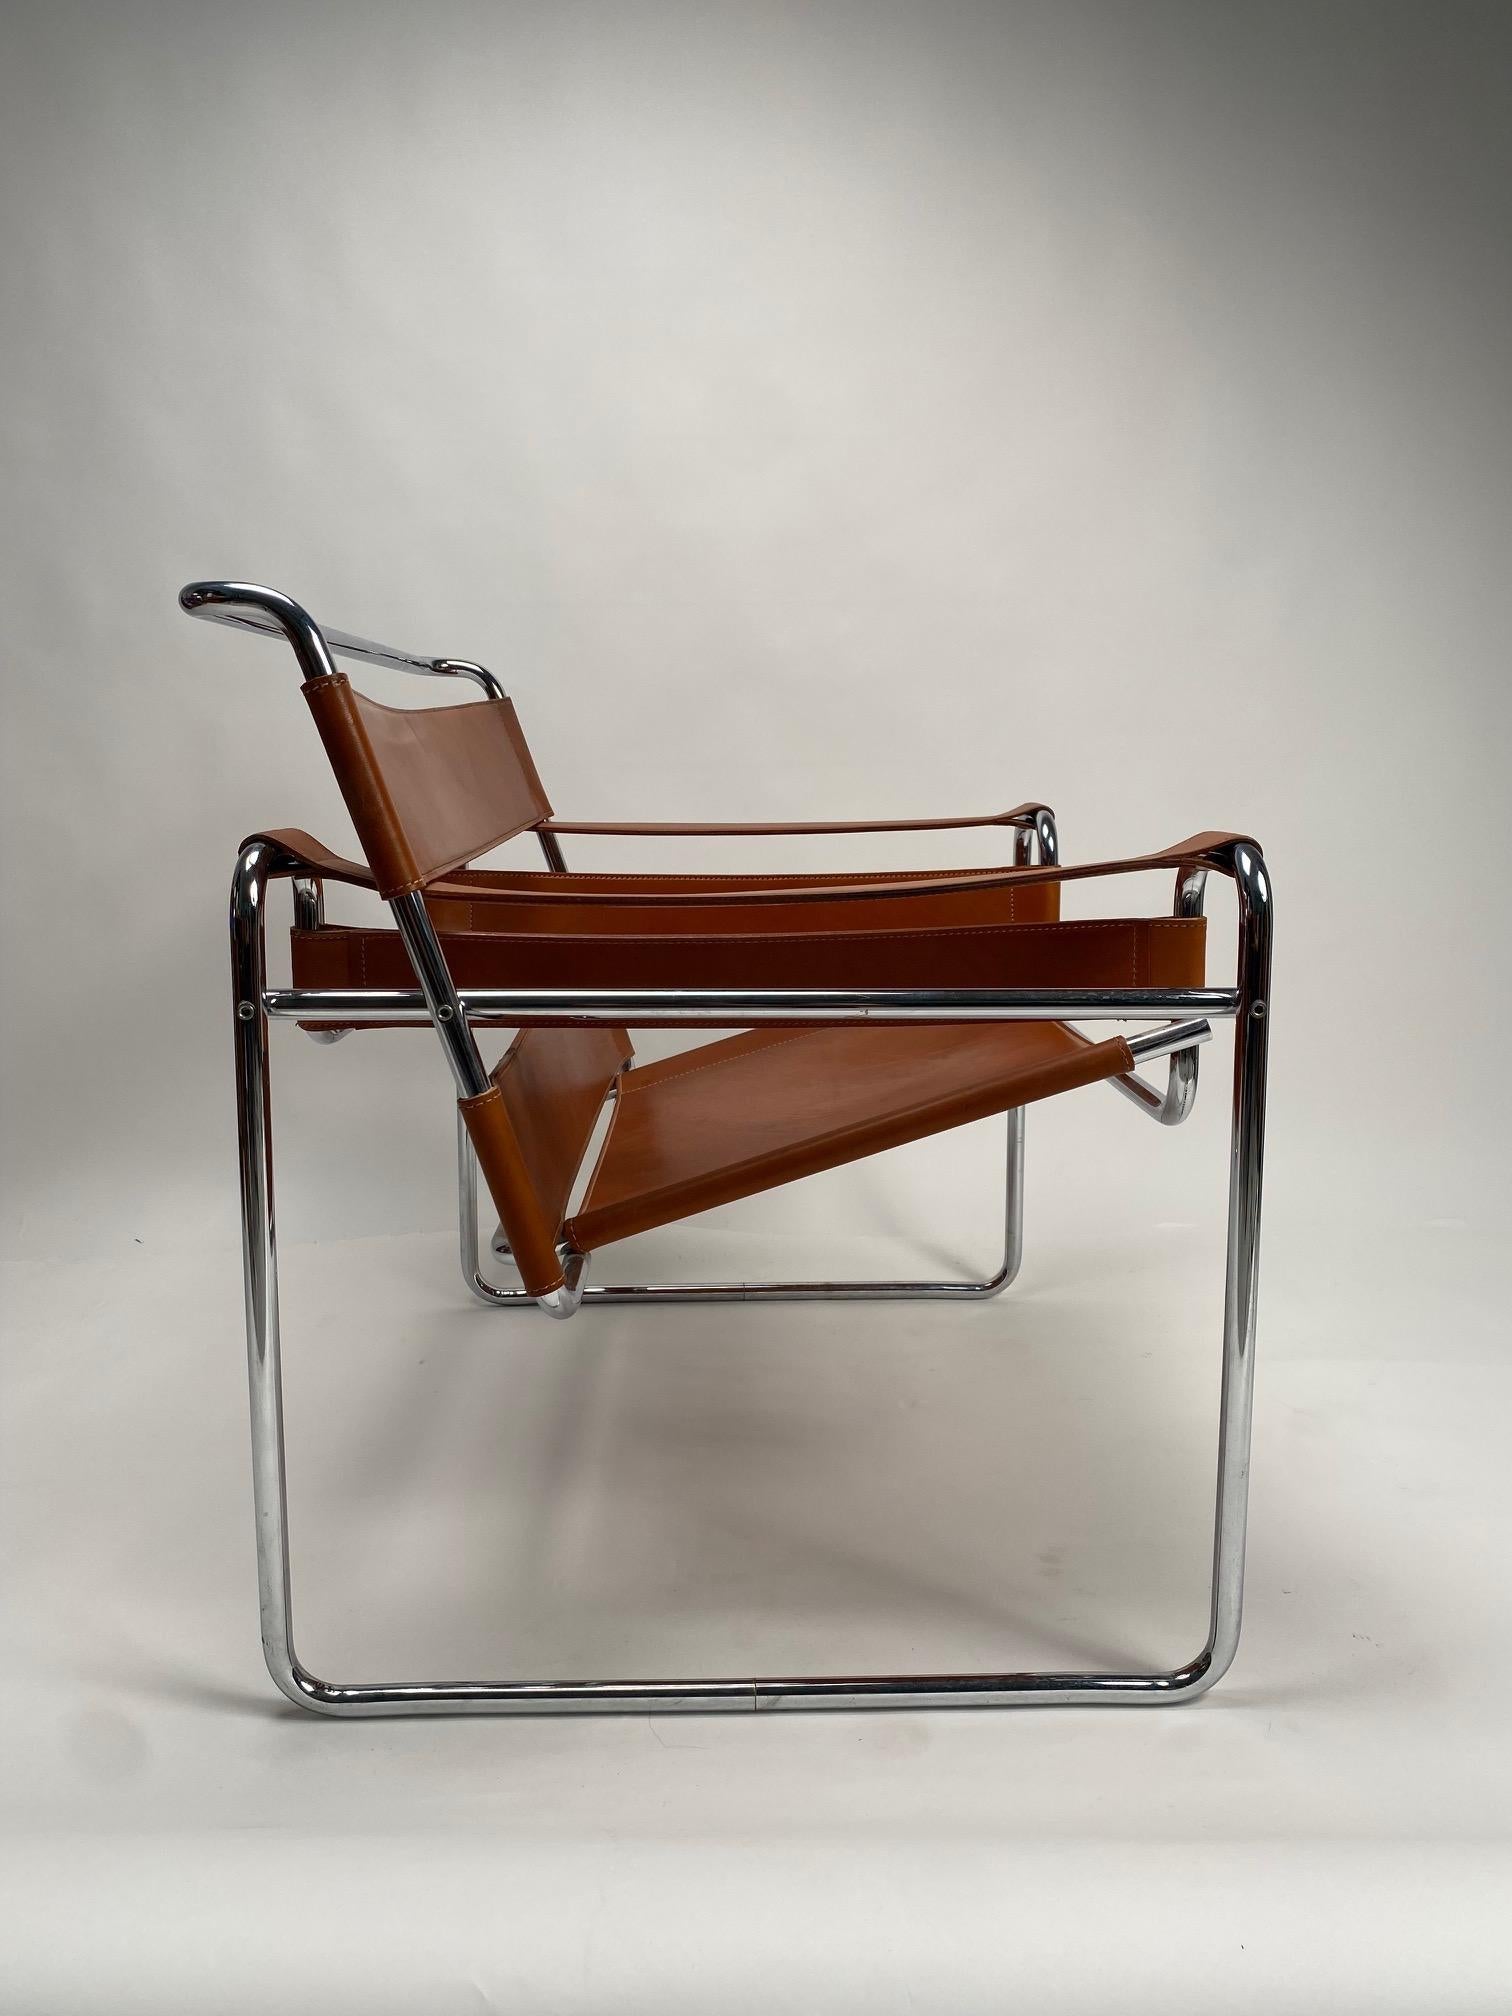 Marcel Breuer, Wassilly Armchair for Gavina, Vintage Original Version, Italy 1970s

The Wassily armchair, one of the most iconic and sophisticated Bauhaus armchairs, designed by Marcel Breuer in 1925-1926, also known as the 'B3' chair. 